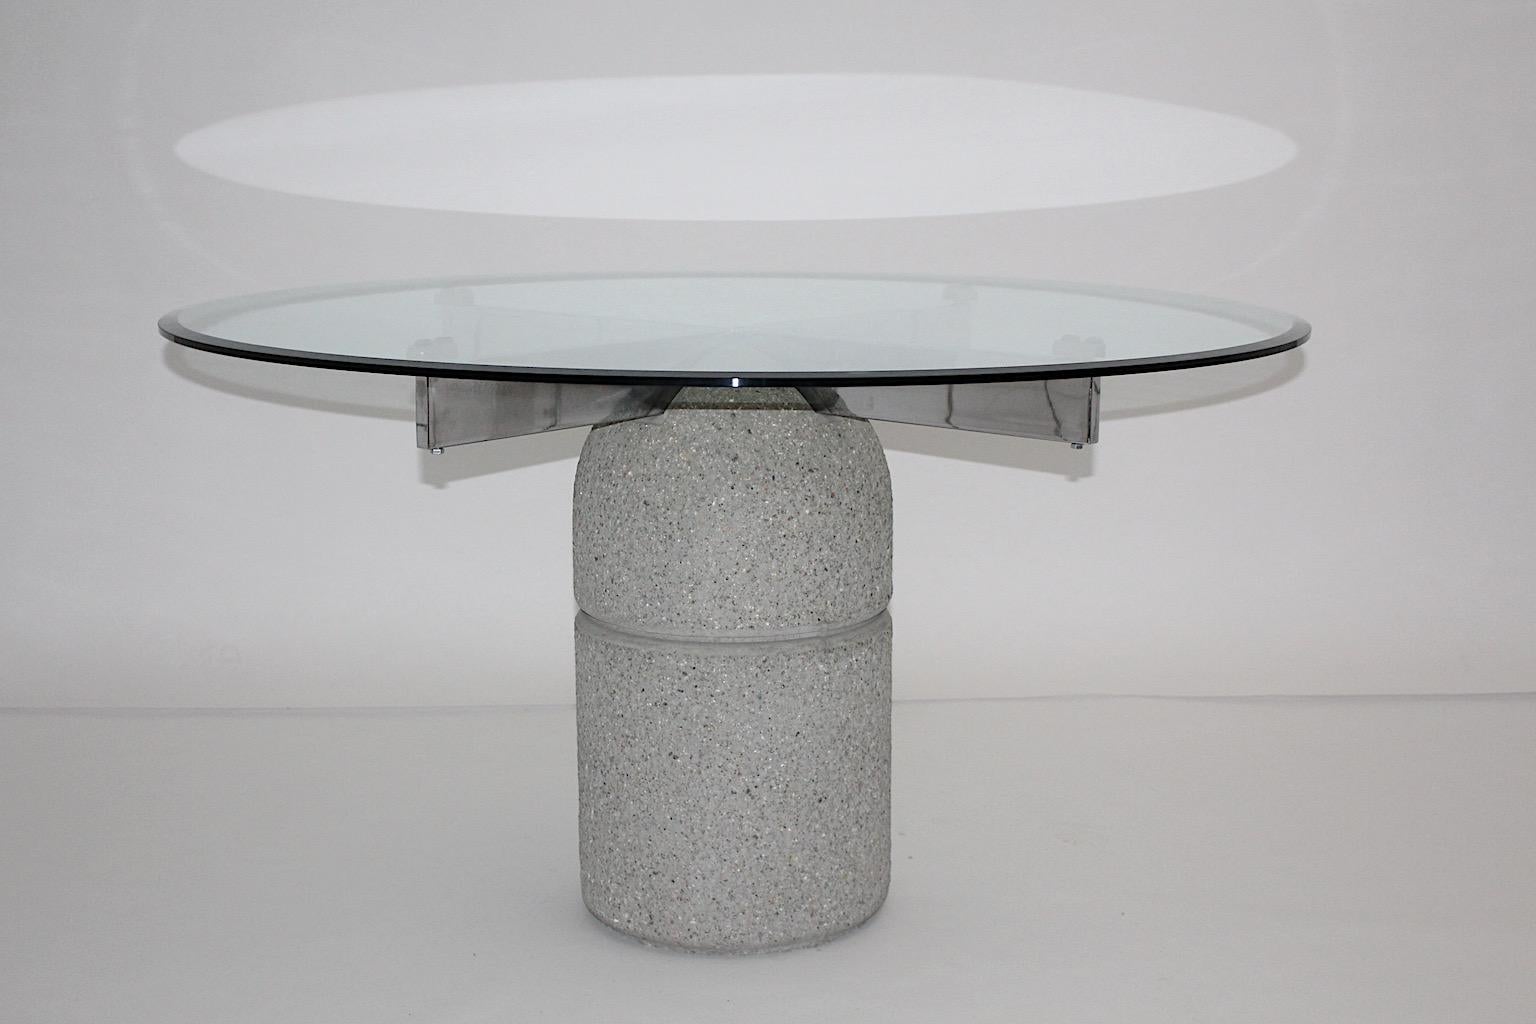 Mid Century Modern vintage dining table Paracarro from stone by Giovanni Offredi 1973, Italy and executed by Saporiti.
The circular base from stone shows a chrome cross for placing the original round clear glass top and features a beautiful